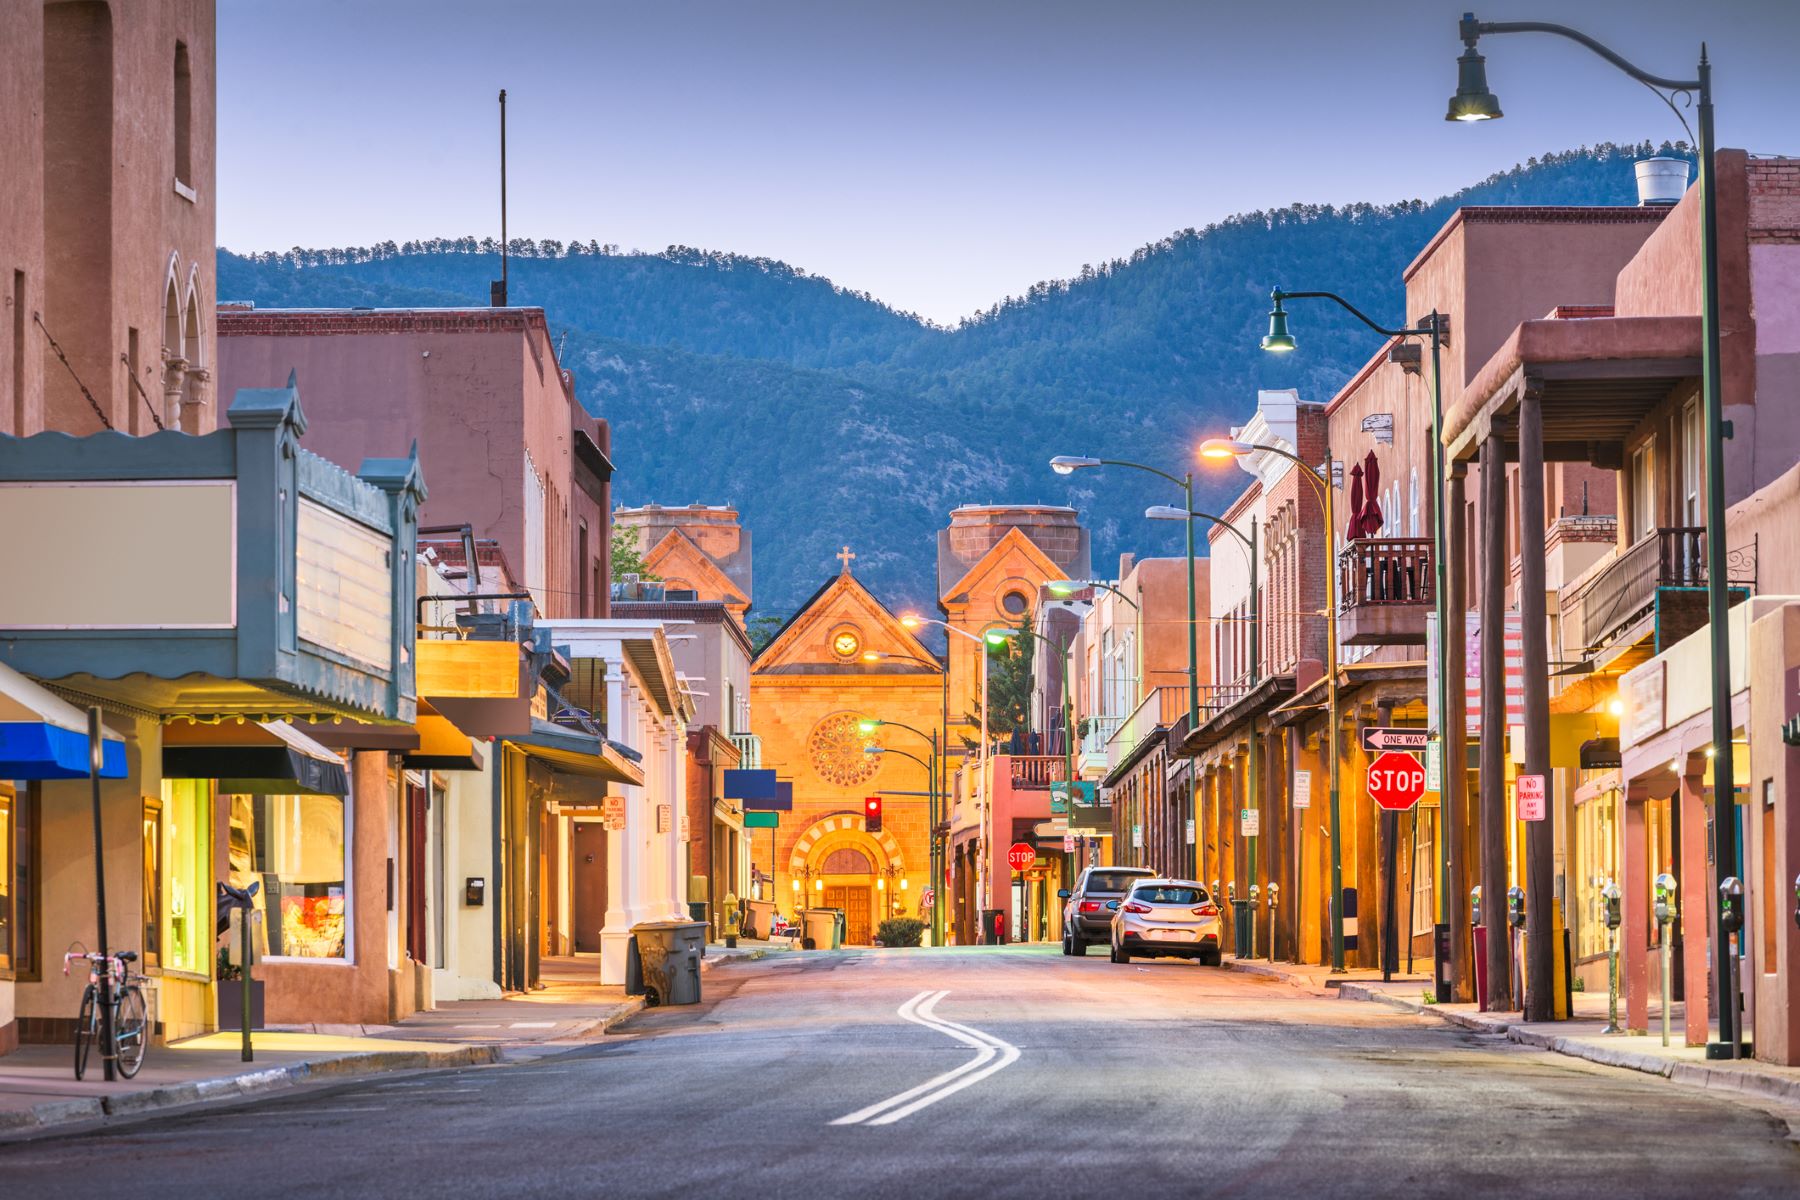 6 Places You Need To See In The Santa Fe Historic District | Four